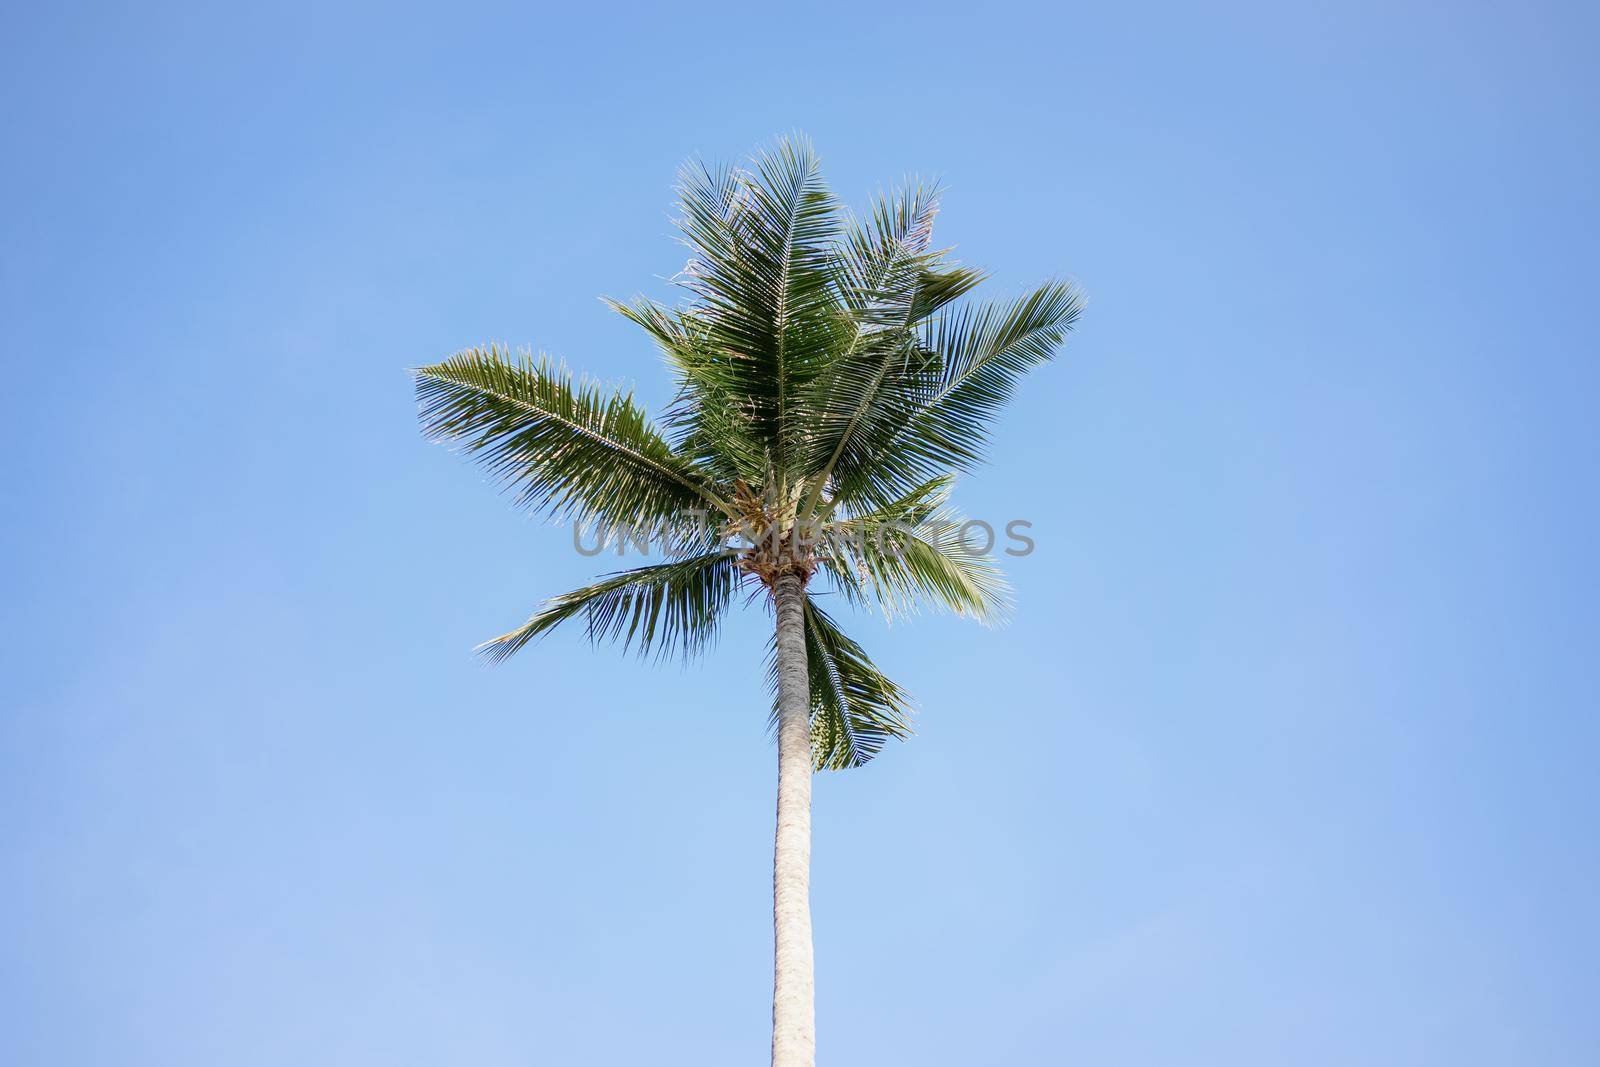 Green Coconut palm tree on blue sky background. by sirawit99